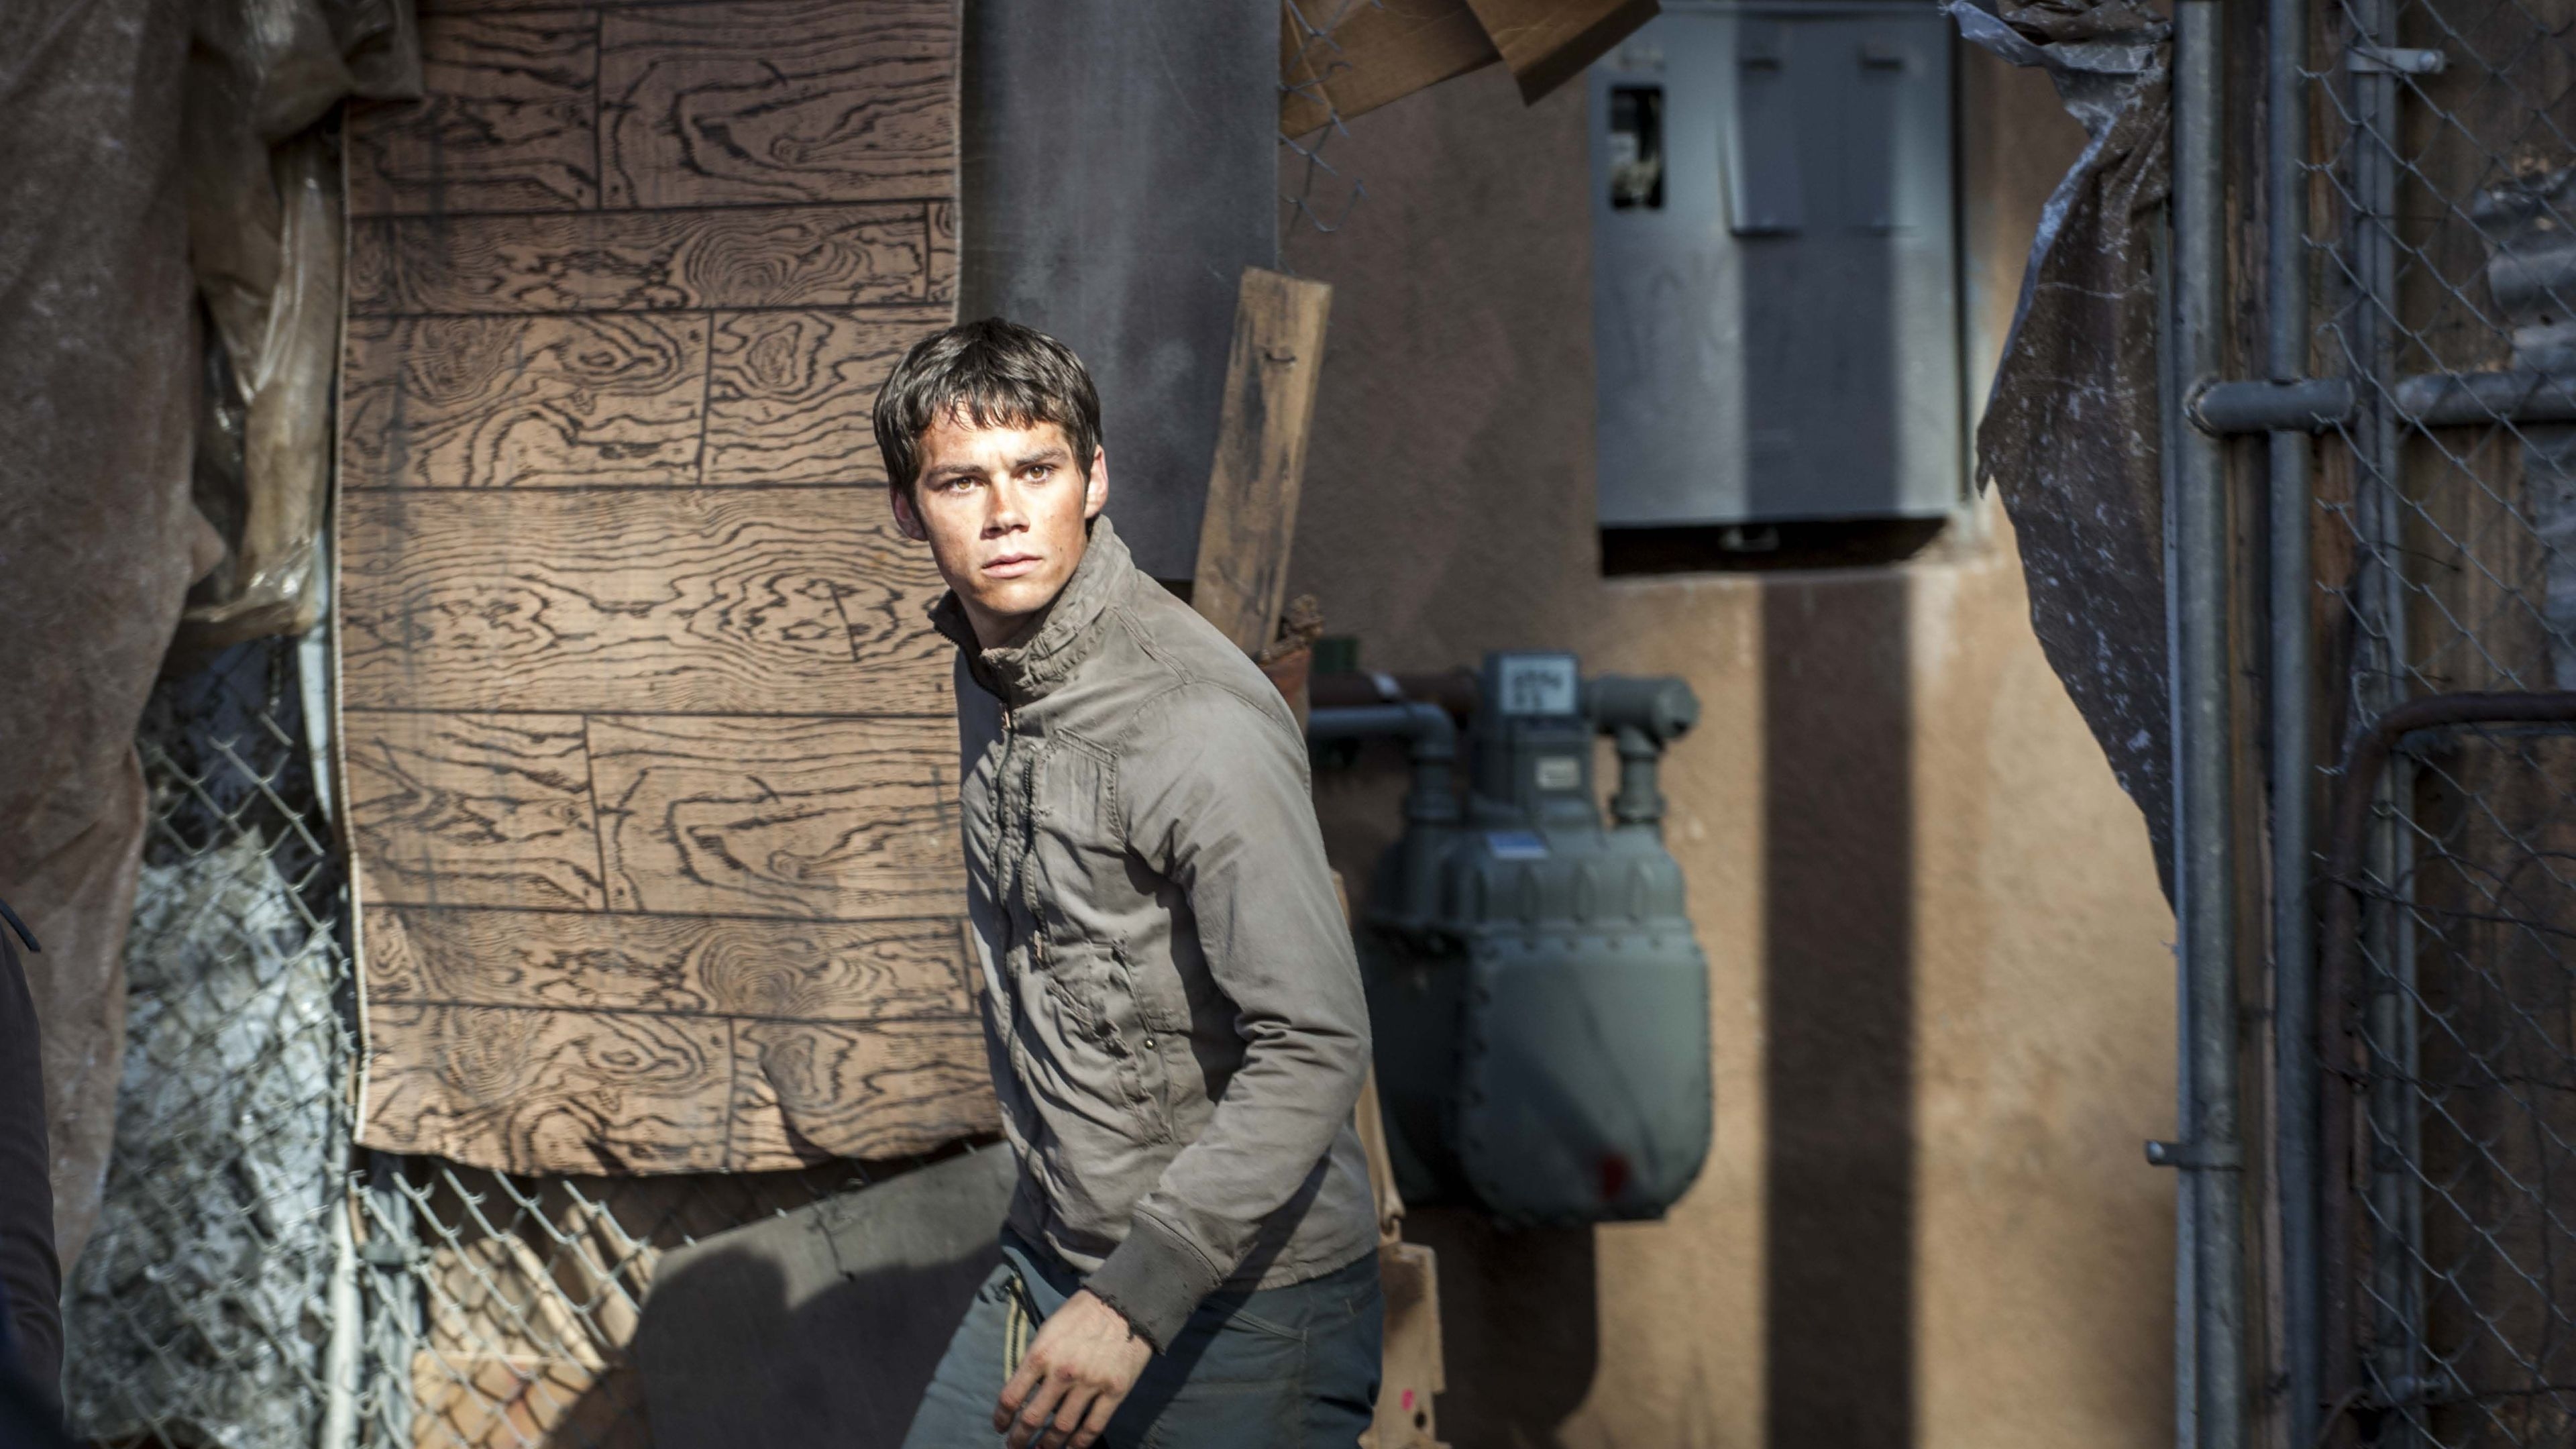 Maze Runner The Scorch Trials: Thomas for 3840 x 2160 Ultra HD resolution